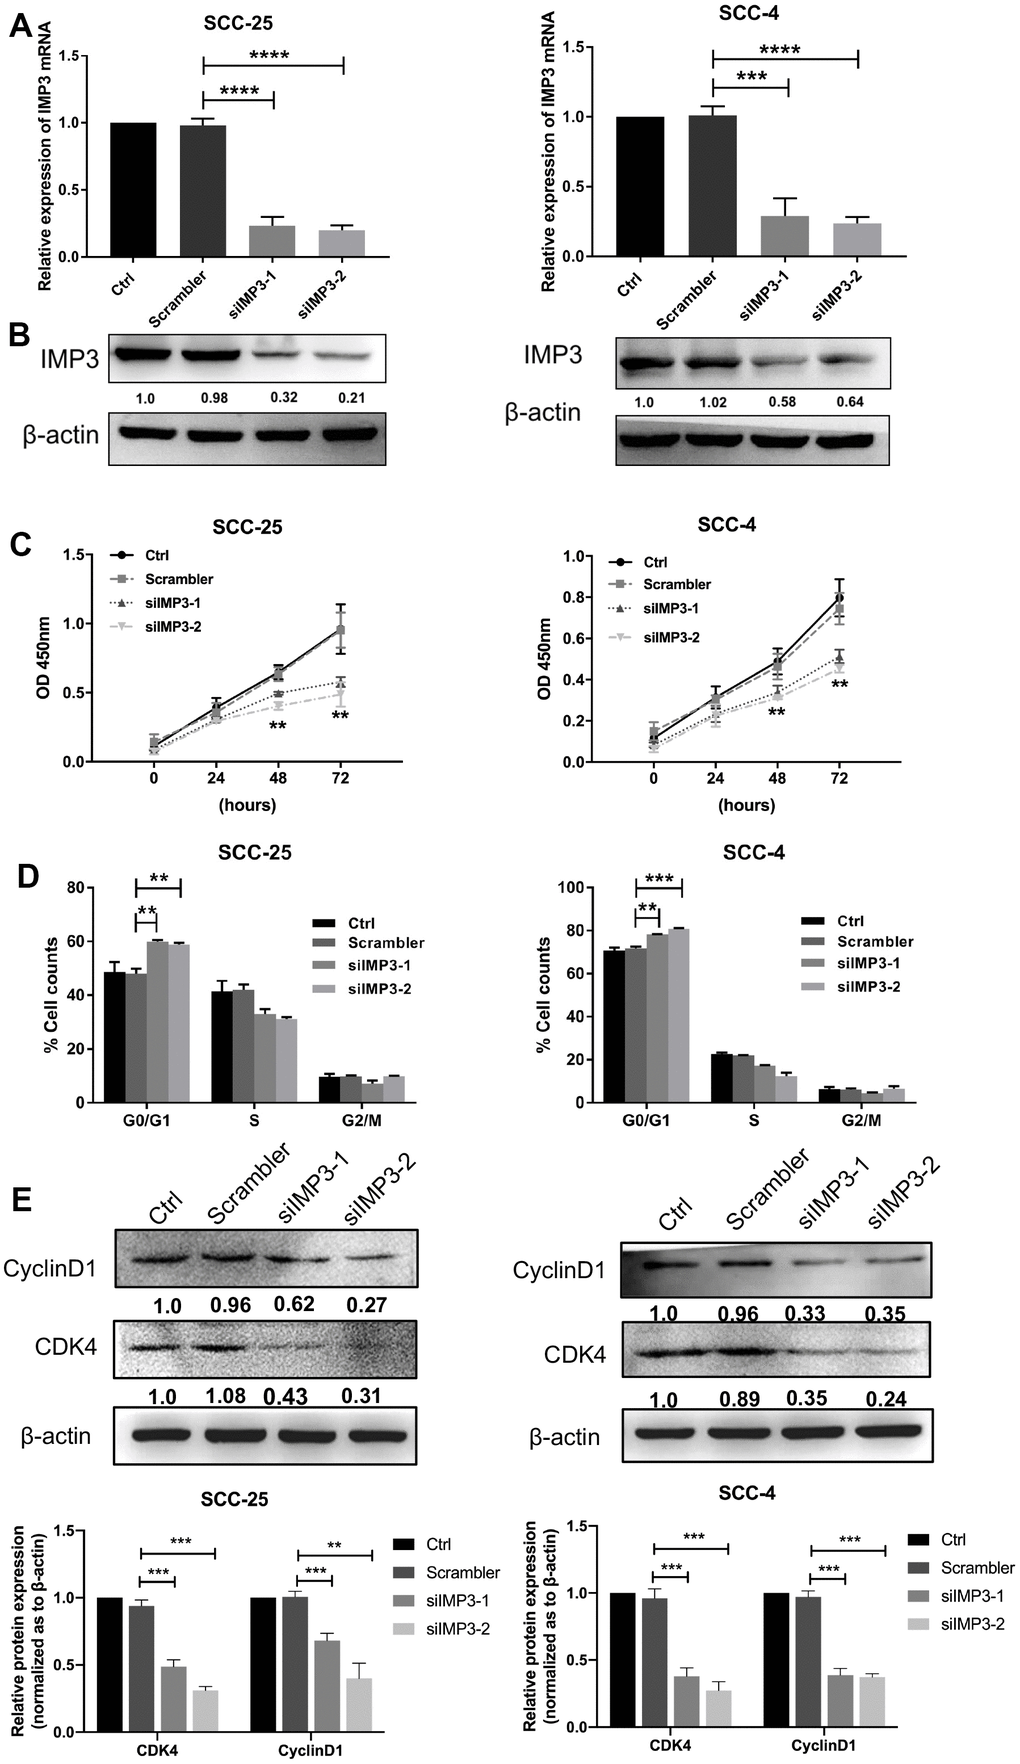 Knockdown of IMP3 inhibits OSCC proliferation. The expression of IMP3 in SCC-25 and SCC-4 cells transfected with IMP3 siRNA was determined by qRT-PCR (A) and Western blot (B). (C) Cell growth in OSCC cells transfected with siIMP3 as measured by CCK8 assay(n=5). (D) Effects of suppression of IMP3 on the cell cycle progression of SCC-25 and SCC-4 cells measured by flow cytometric analysis. (E) Expression analysis for cell cycles regulators Cyclin D1 and CDK4 was performed by Western blot. Relative expression levels were calculated using the image J software (n = 3). P ≤ 0.05 was considered to be statistically significant, **P P P 